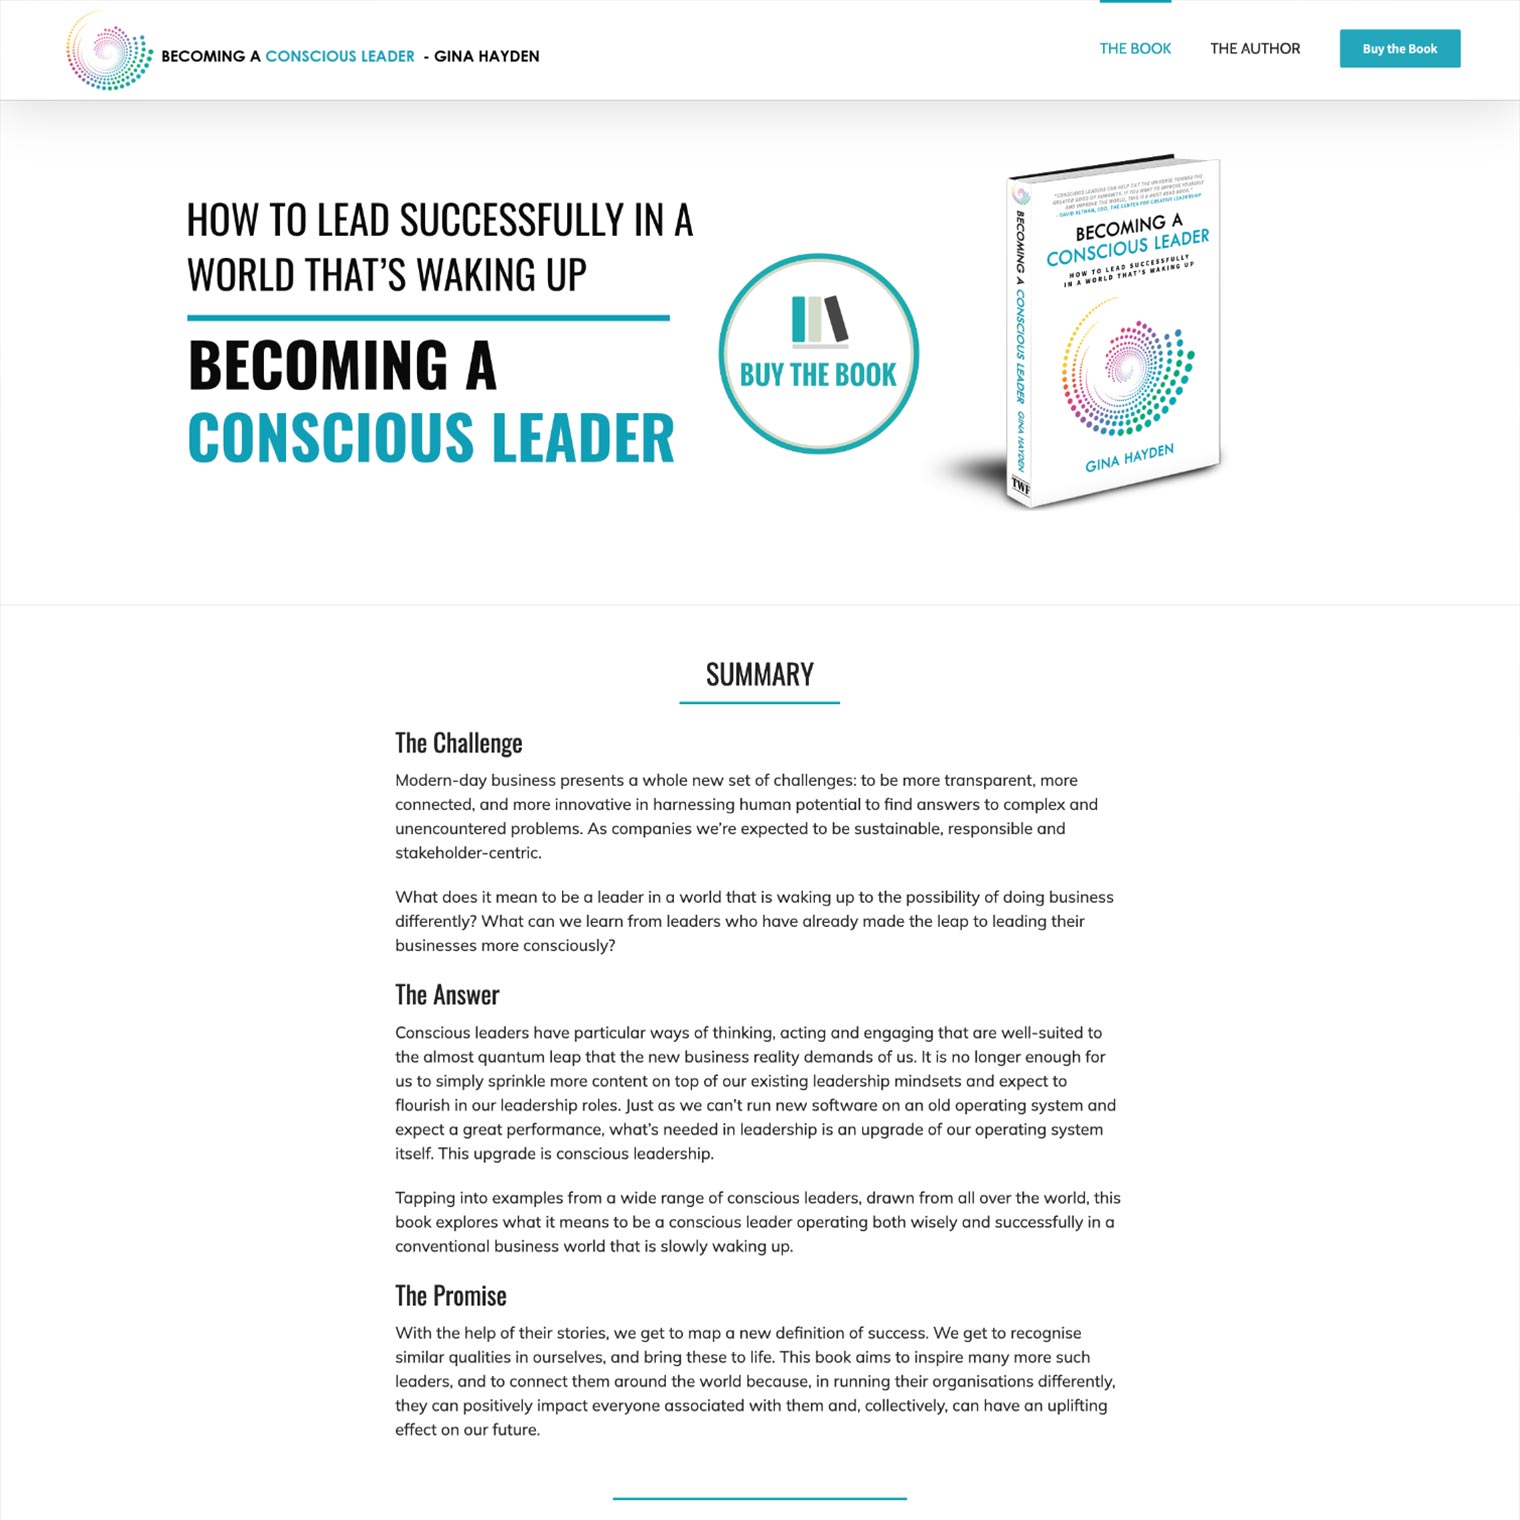 Becoming a Conscious Leader